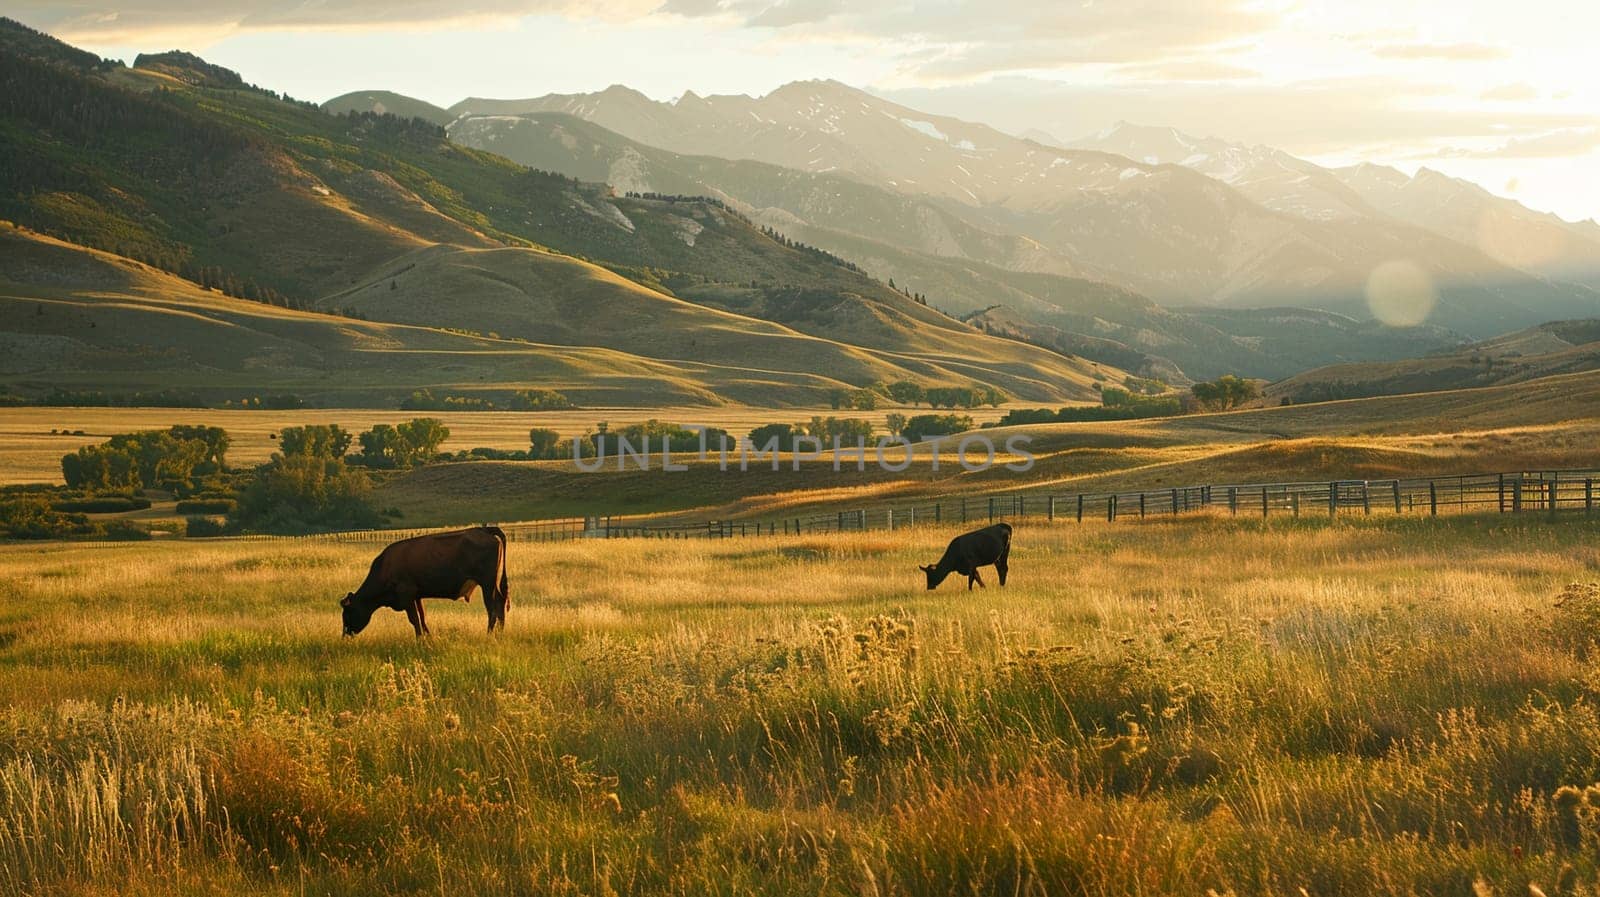 Idyllic scene of cows grazing on lush grass in meadow during golden hour with picturesque mountains in background, symbolizing tranquility and agriculture.